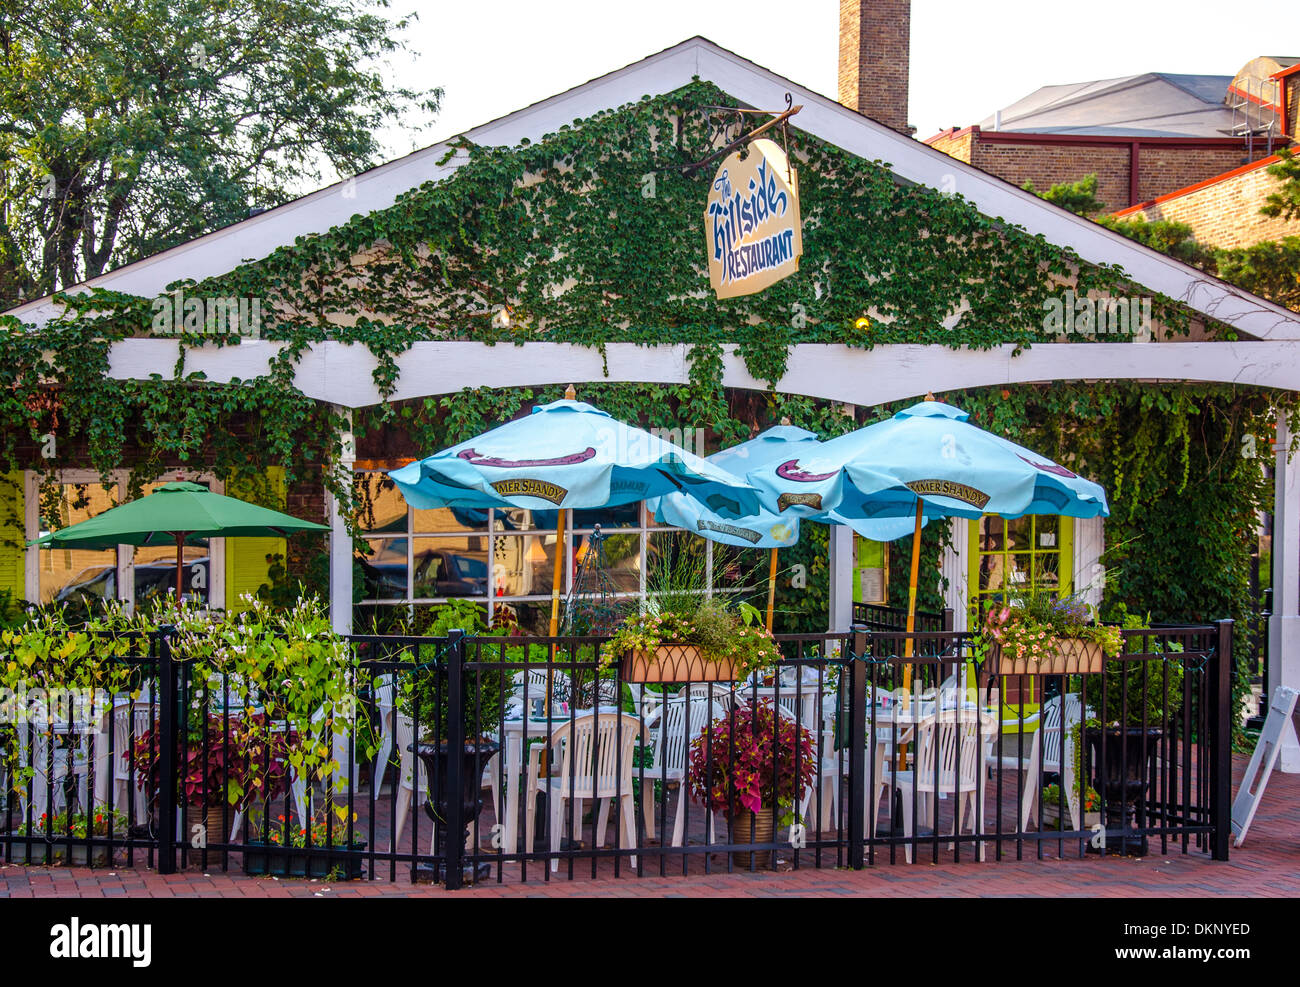 The Hillside is a popular restaurant in DeKalb, Illinois a town along the Lincoln Highway. Stock Photo